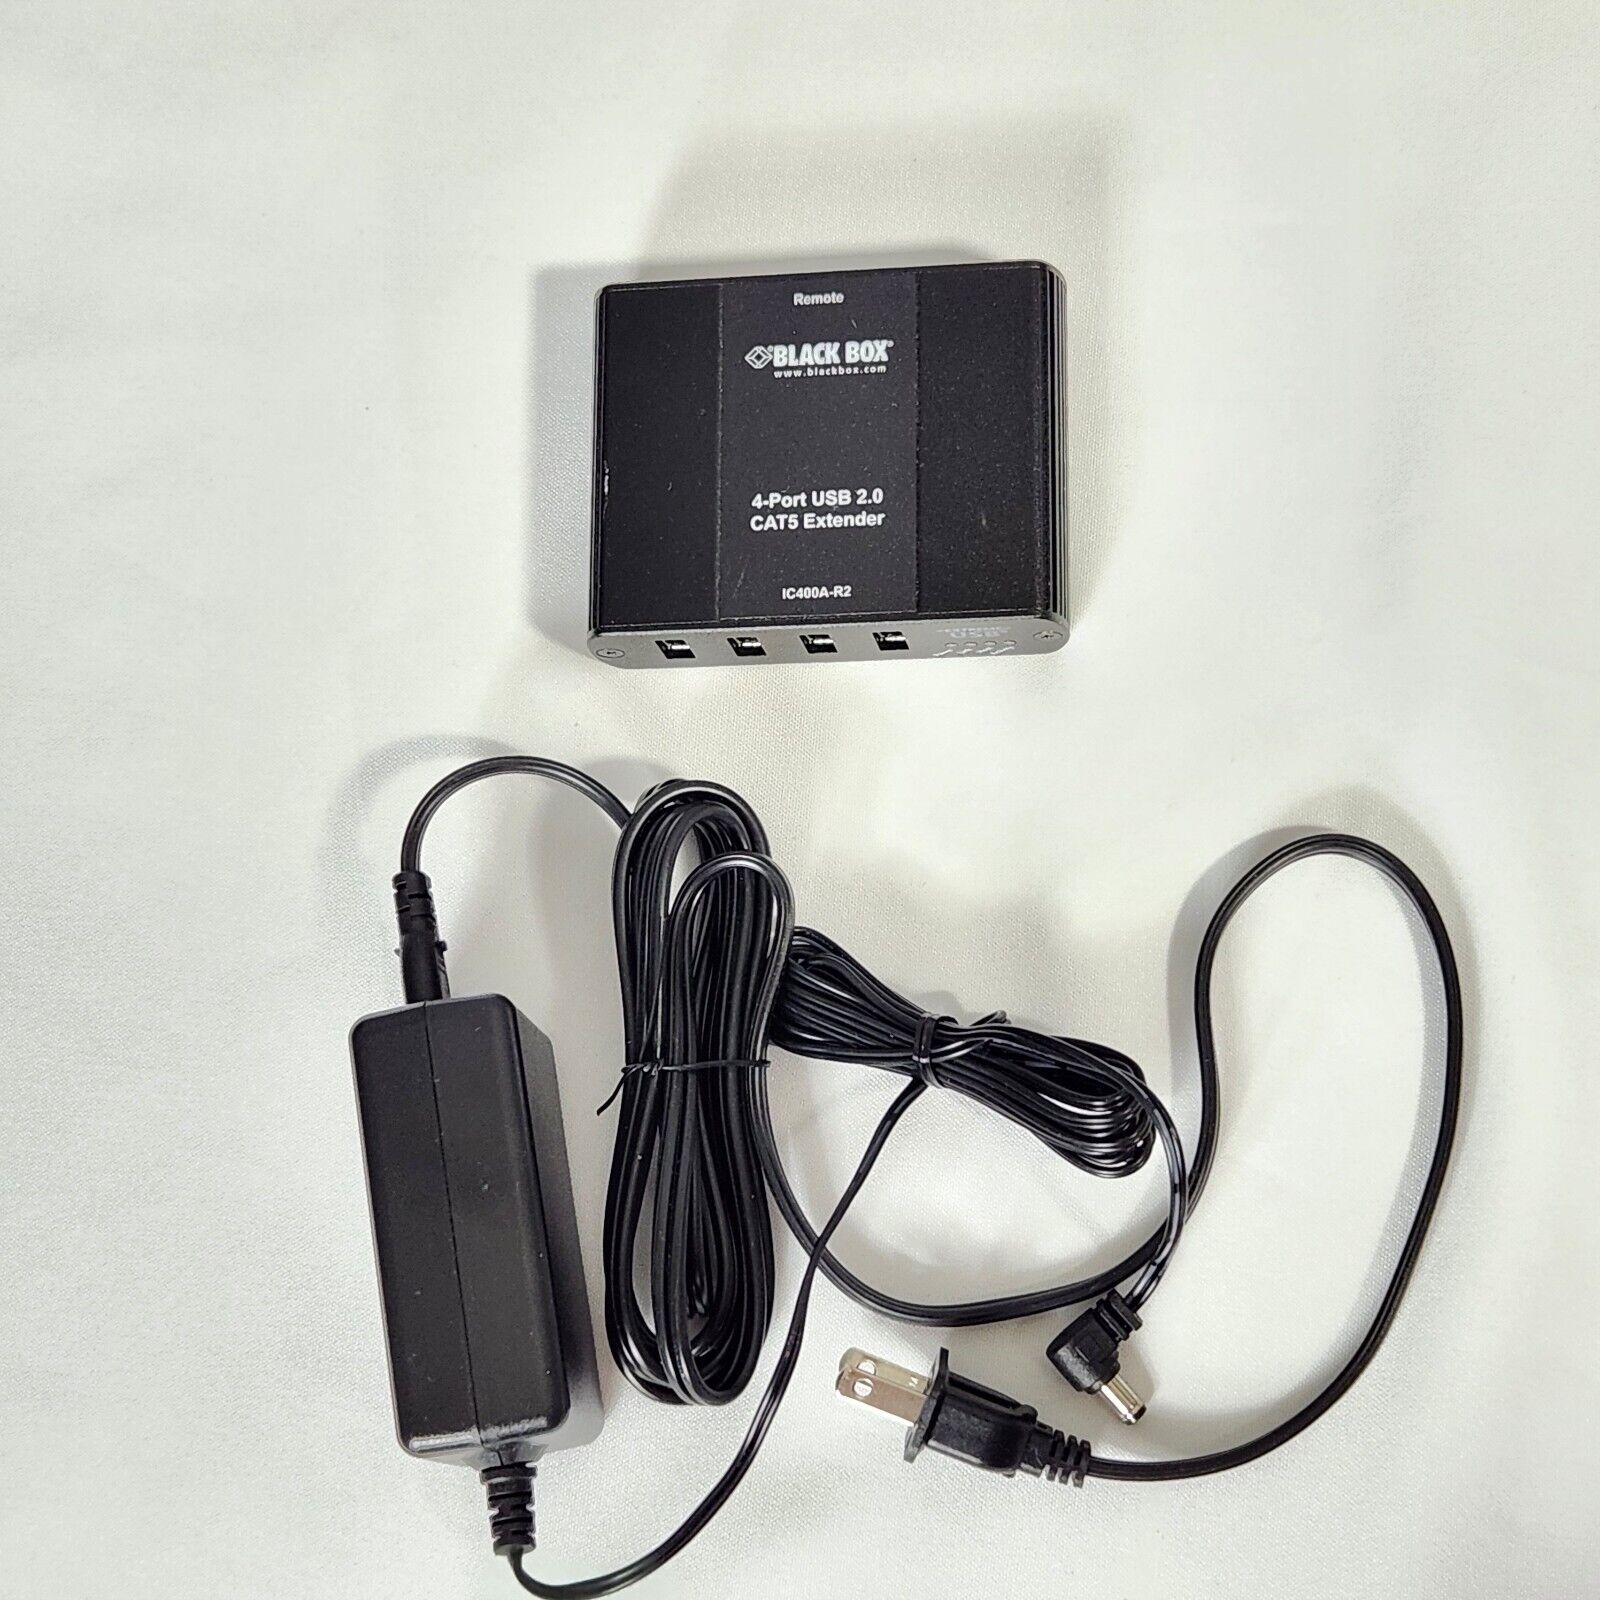 Black Box 4-port USB 2.0 CAT5 Extender IC400A-R2 ( local unit only) with Power